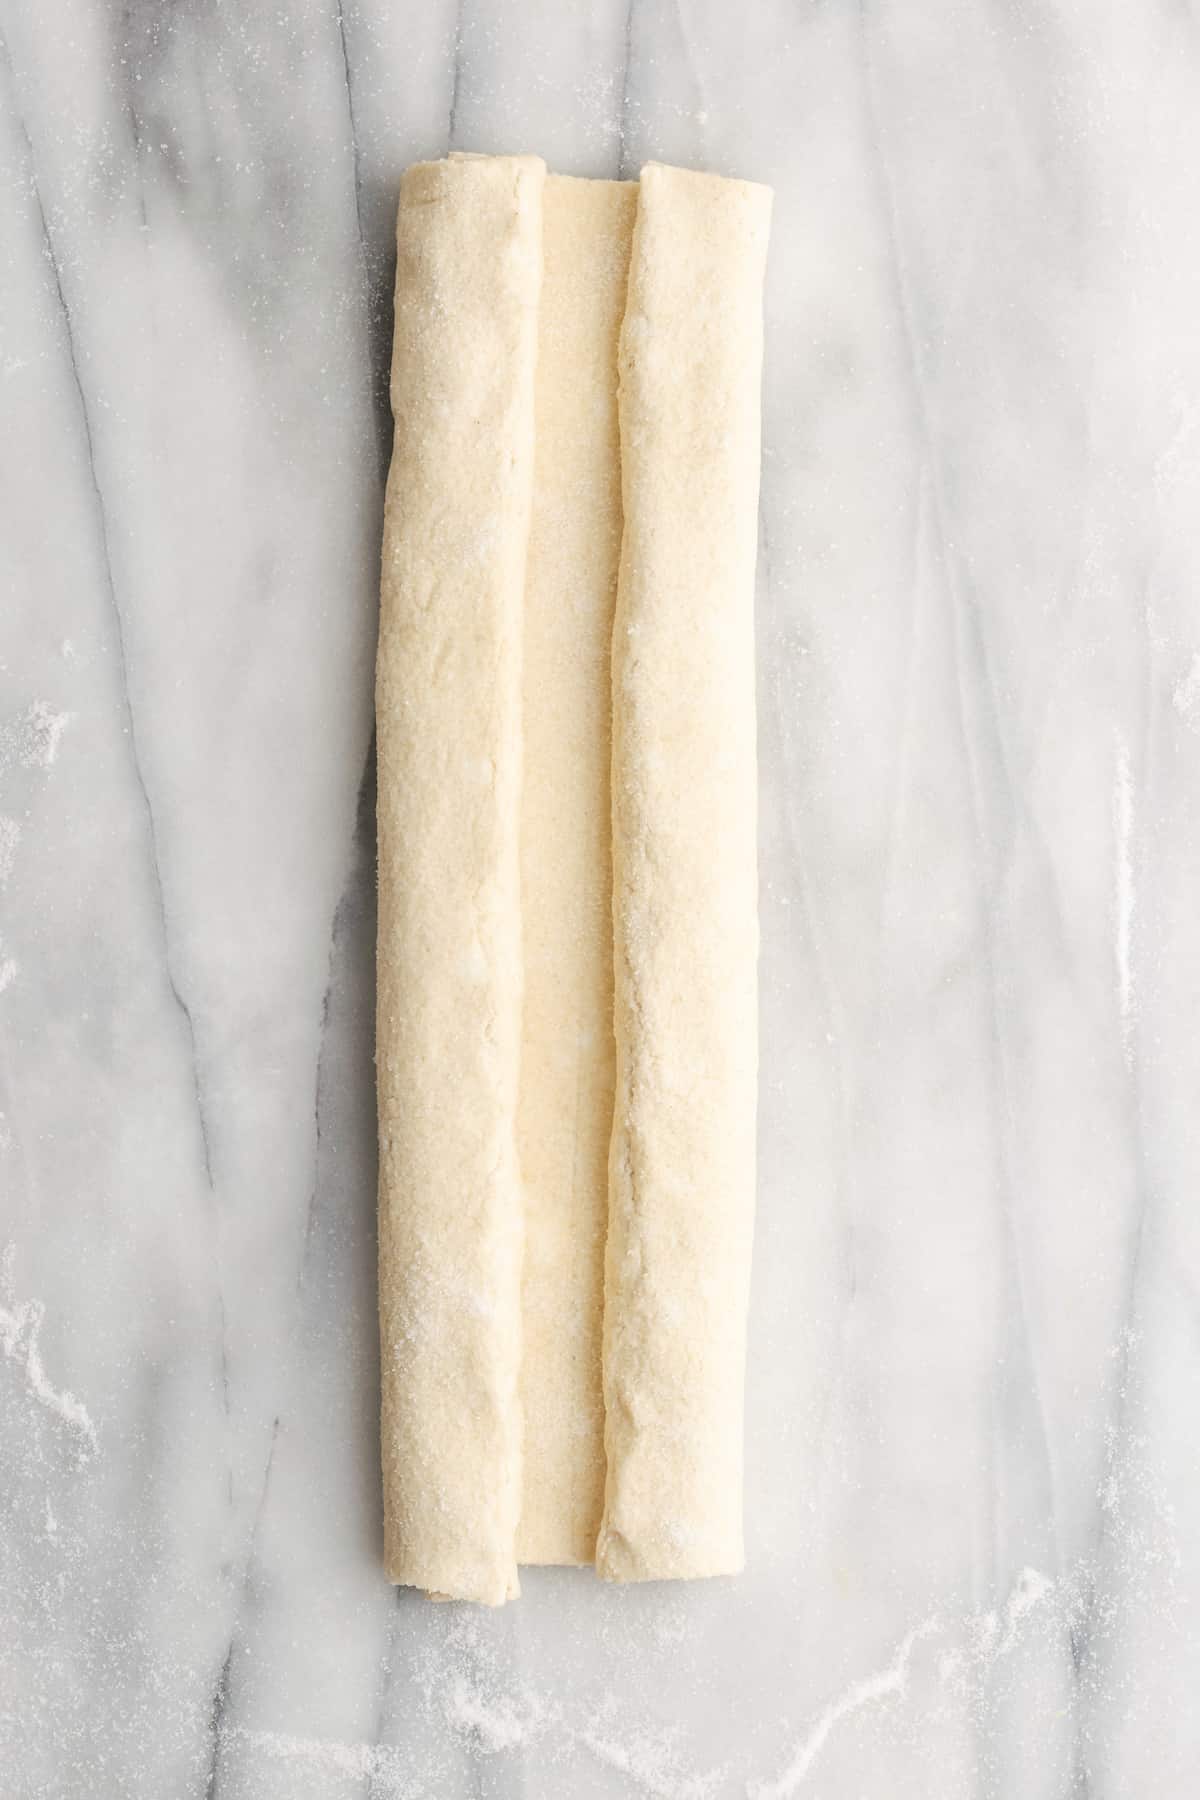 A rectangle of puff pastry dough with both sides folded in towards the middle